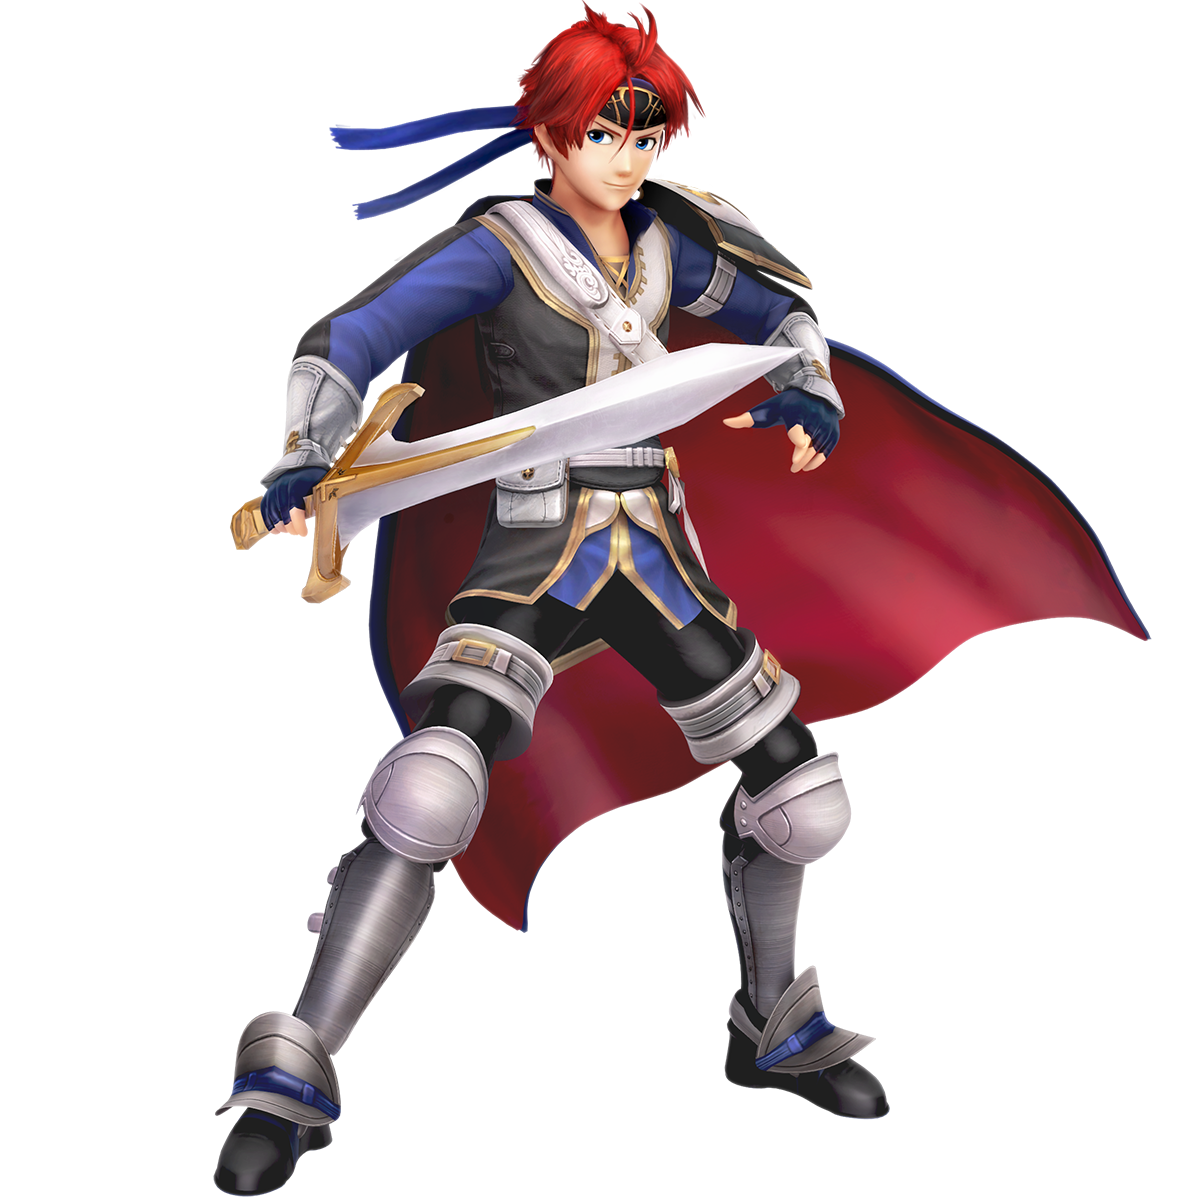 Brawl Marth Awaking Roy Chrom Melee Roy had help from. and Roy models from....